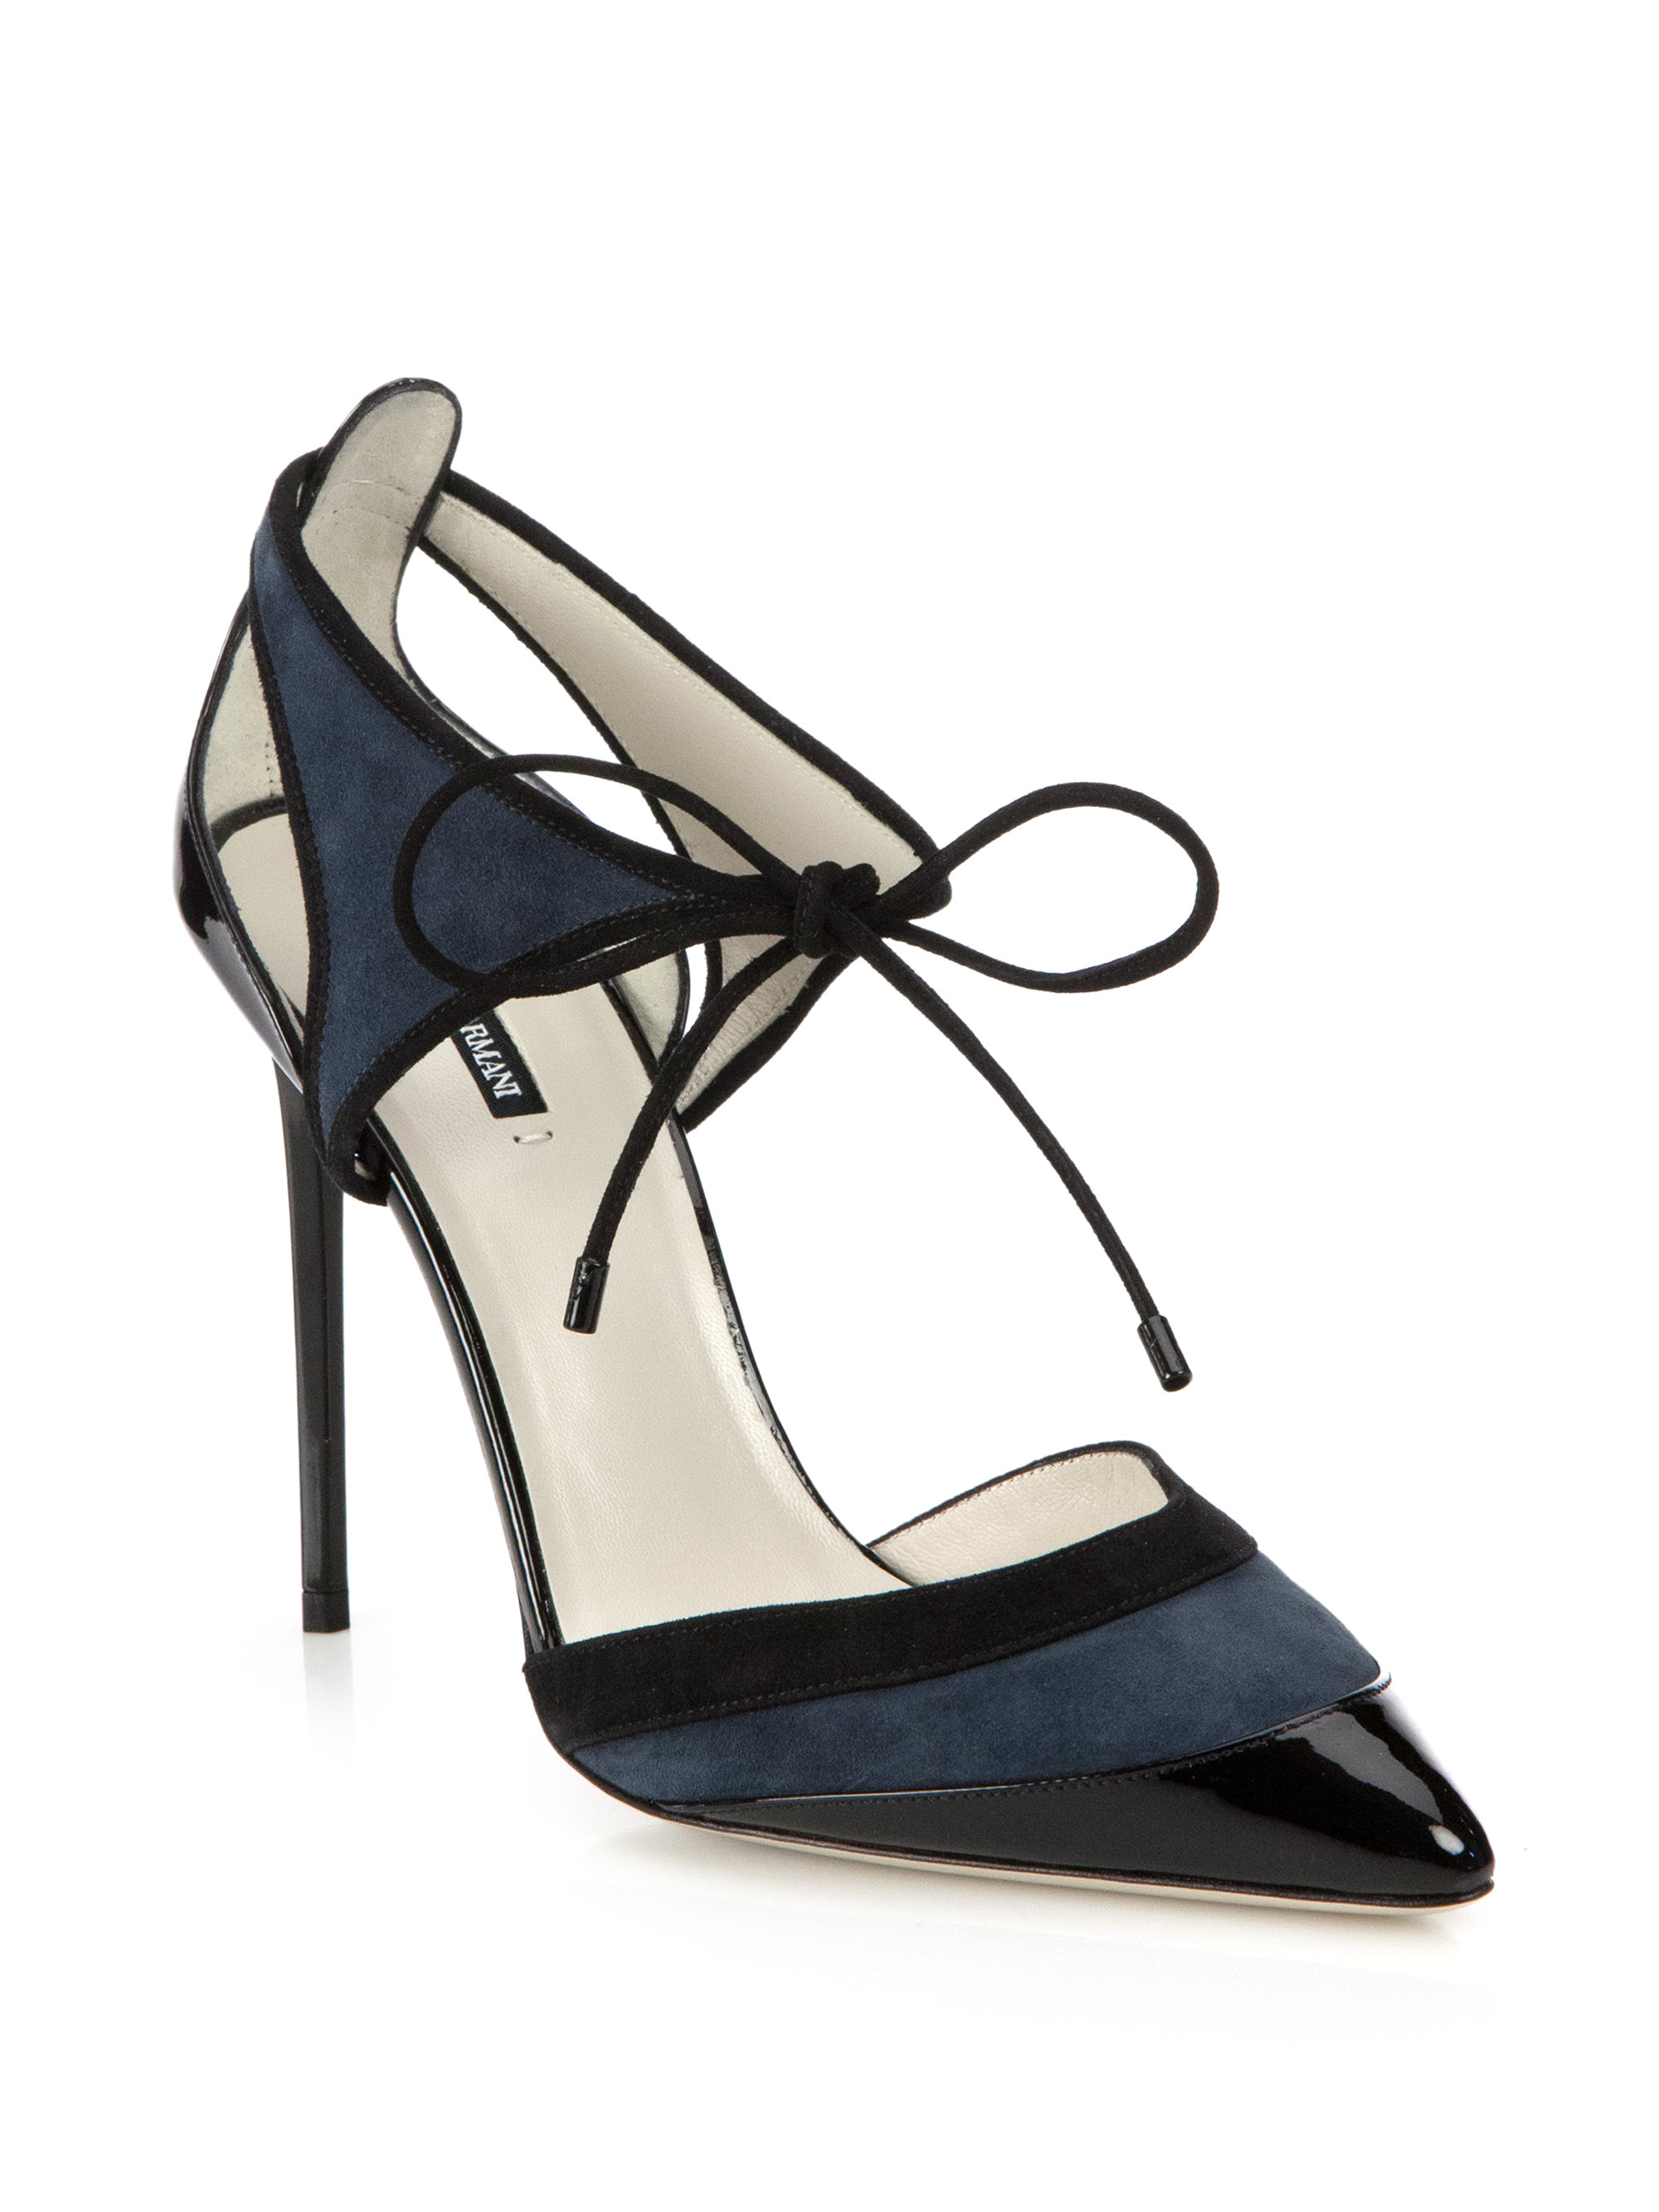 Lyst - Giorgio Armani Suede & Patent Leather Cutout Ankle-tie Pumps in Blue